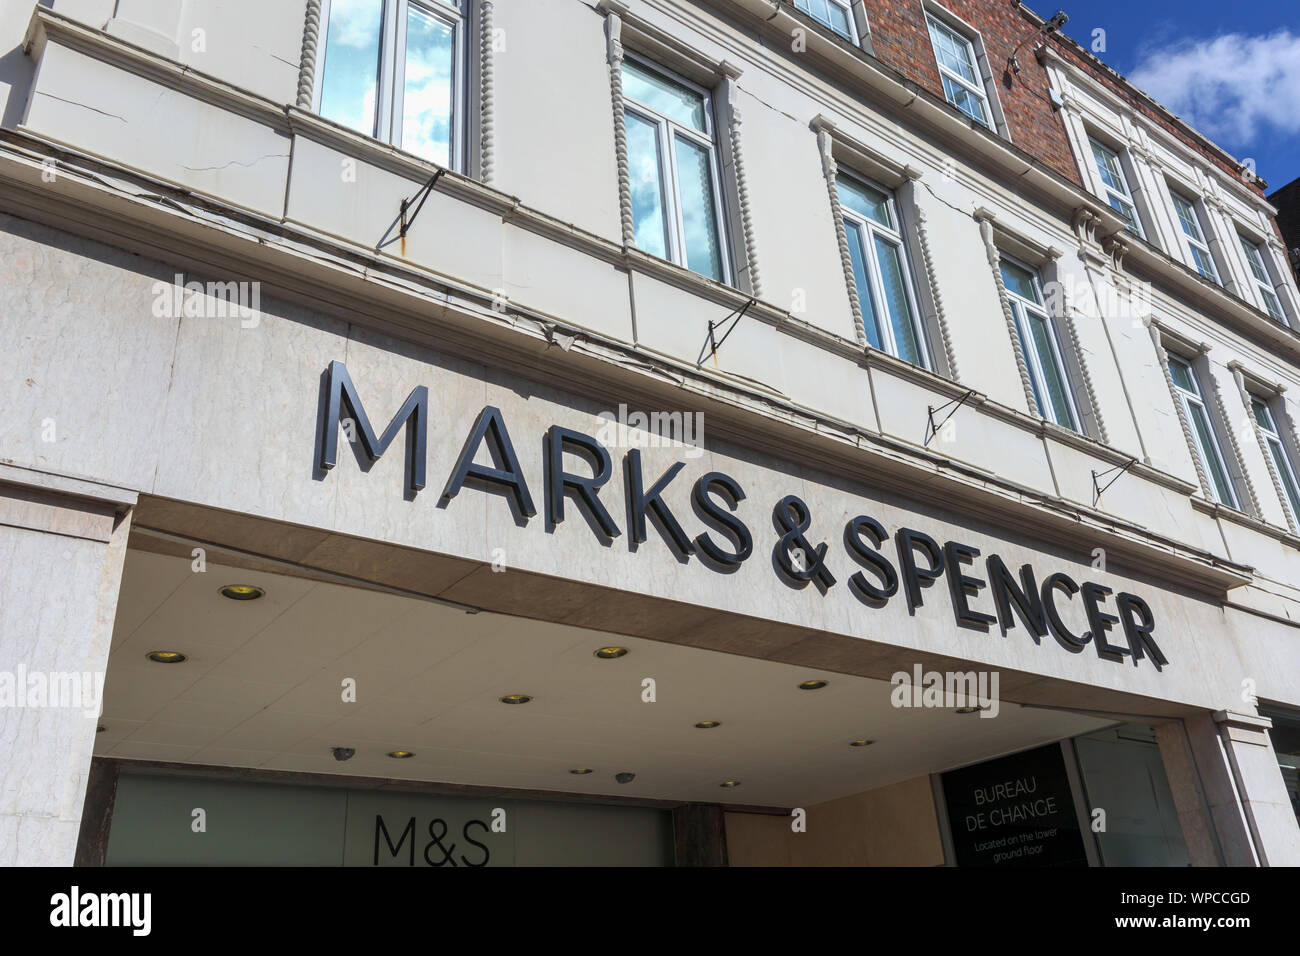 Marks & Spencer name on the frontage above the entrance to its shop in High Street, Guildford, Surrey, south-east England, UK Stock Photo